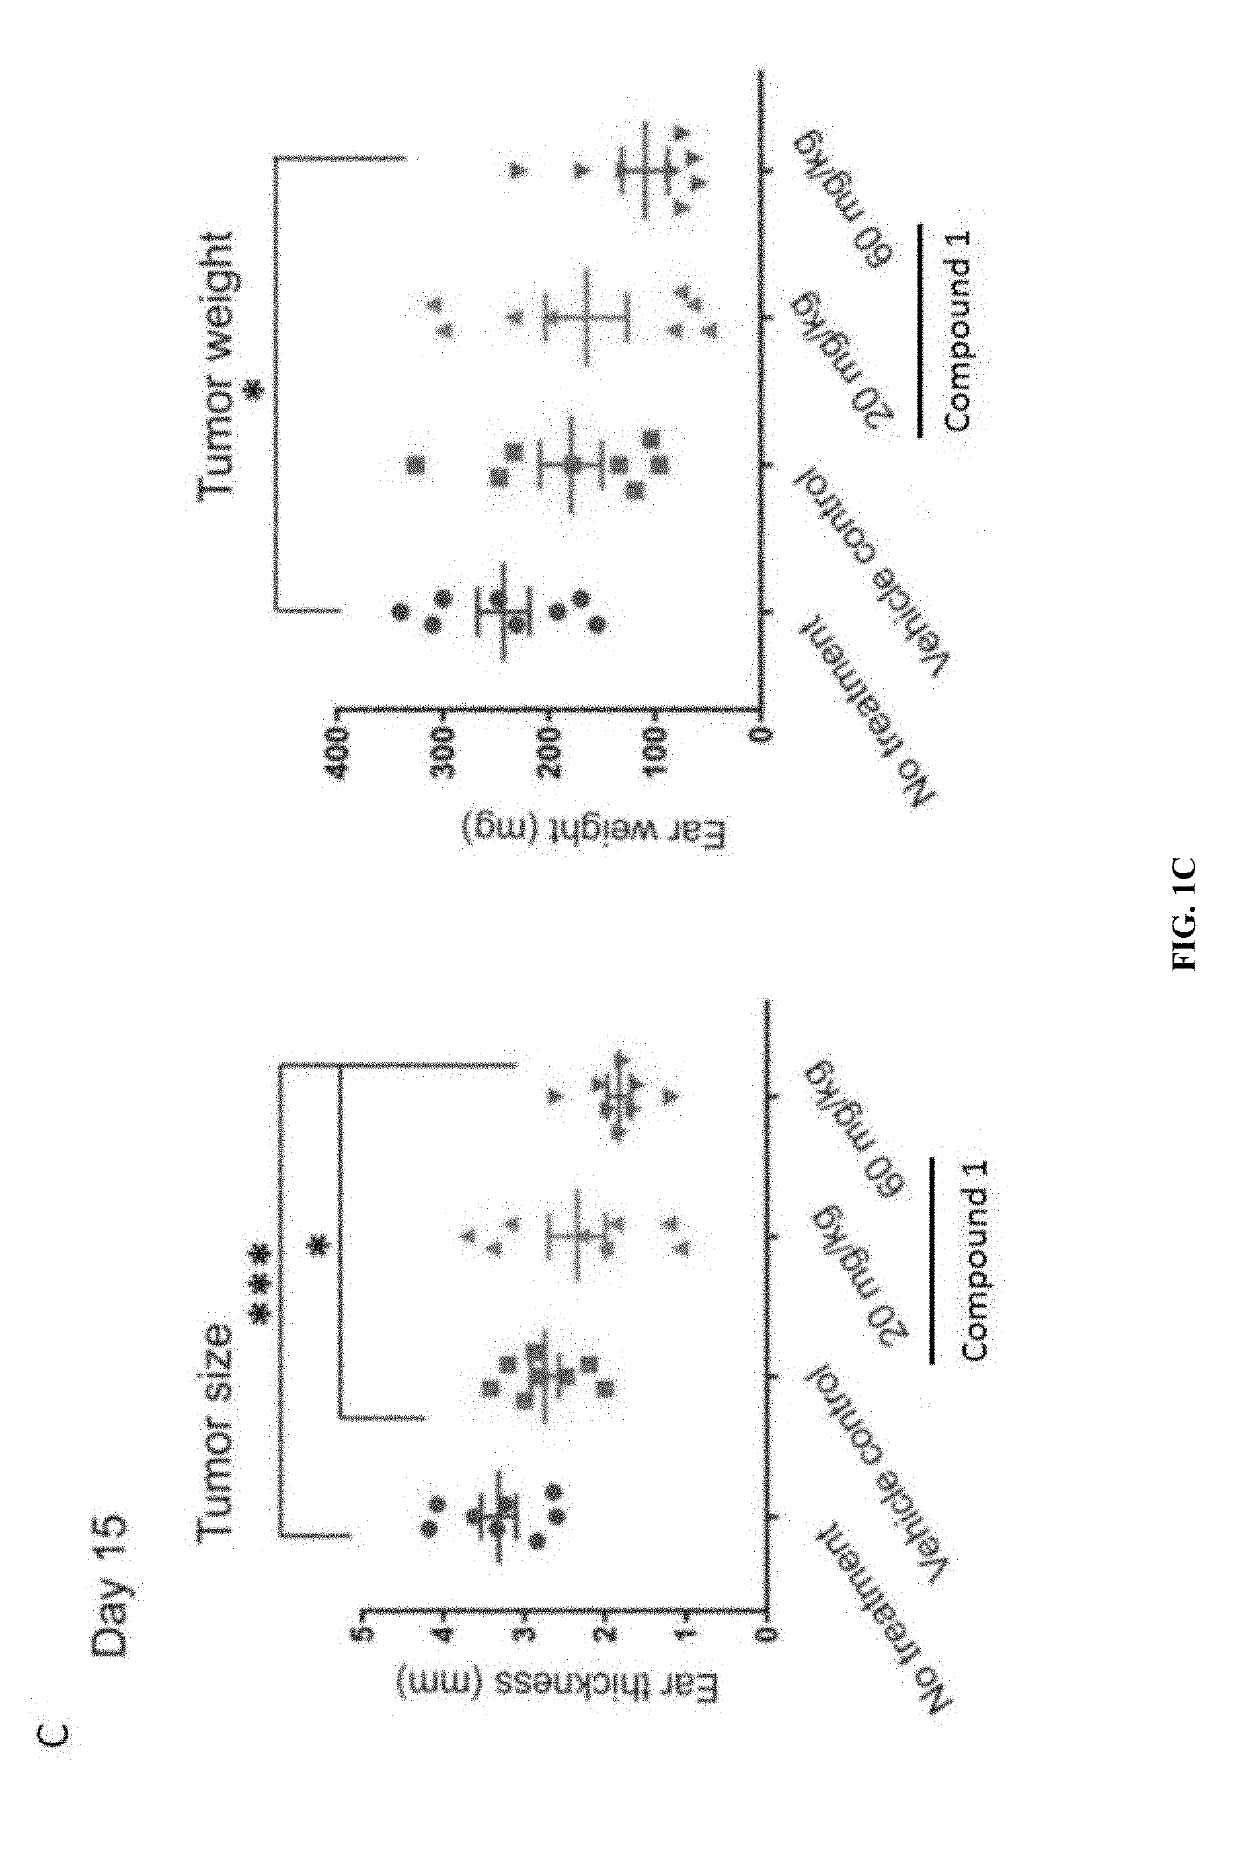 Methods of treating solid tumors with CCR2 antagonists